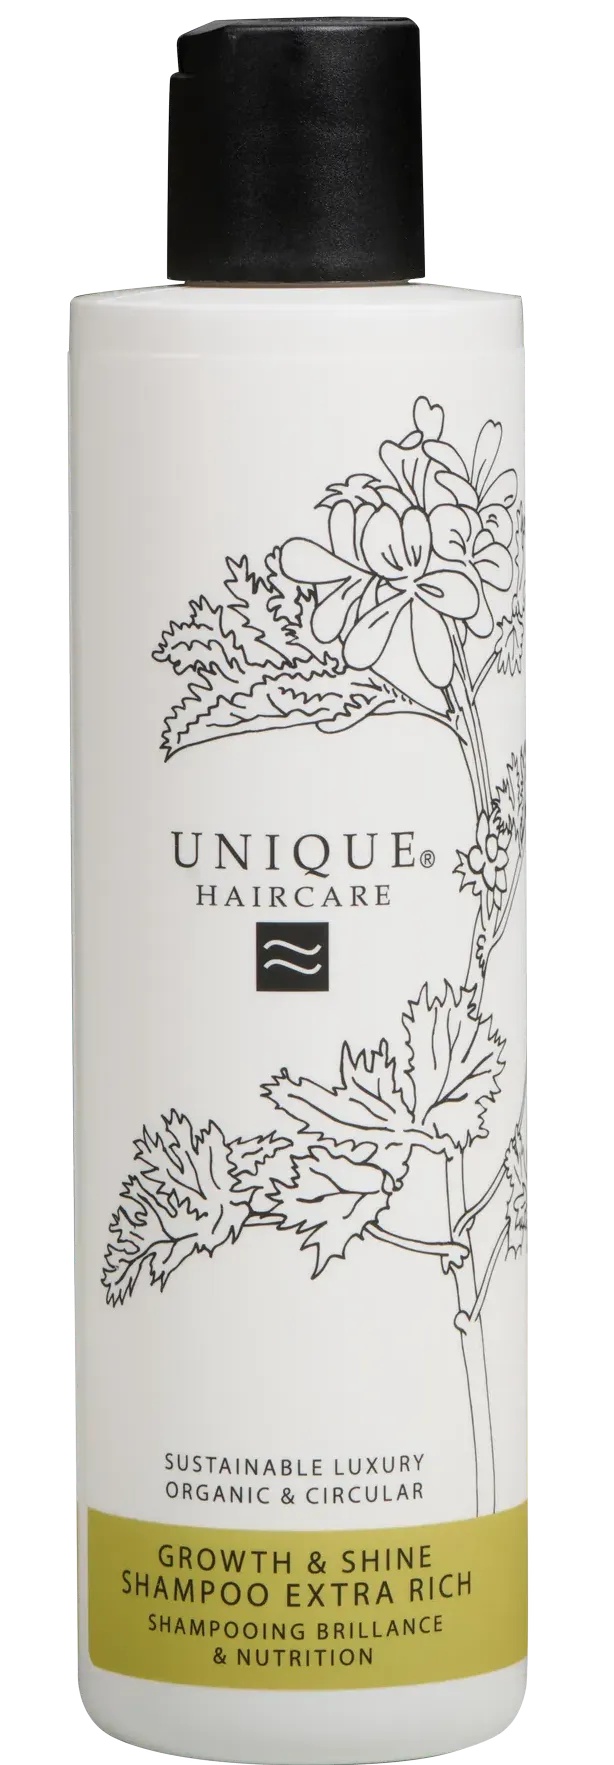 Unique Haircare Growth And Shine Shampoo Extra Rich